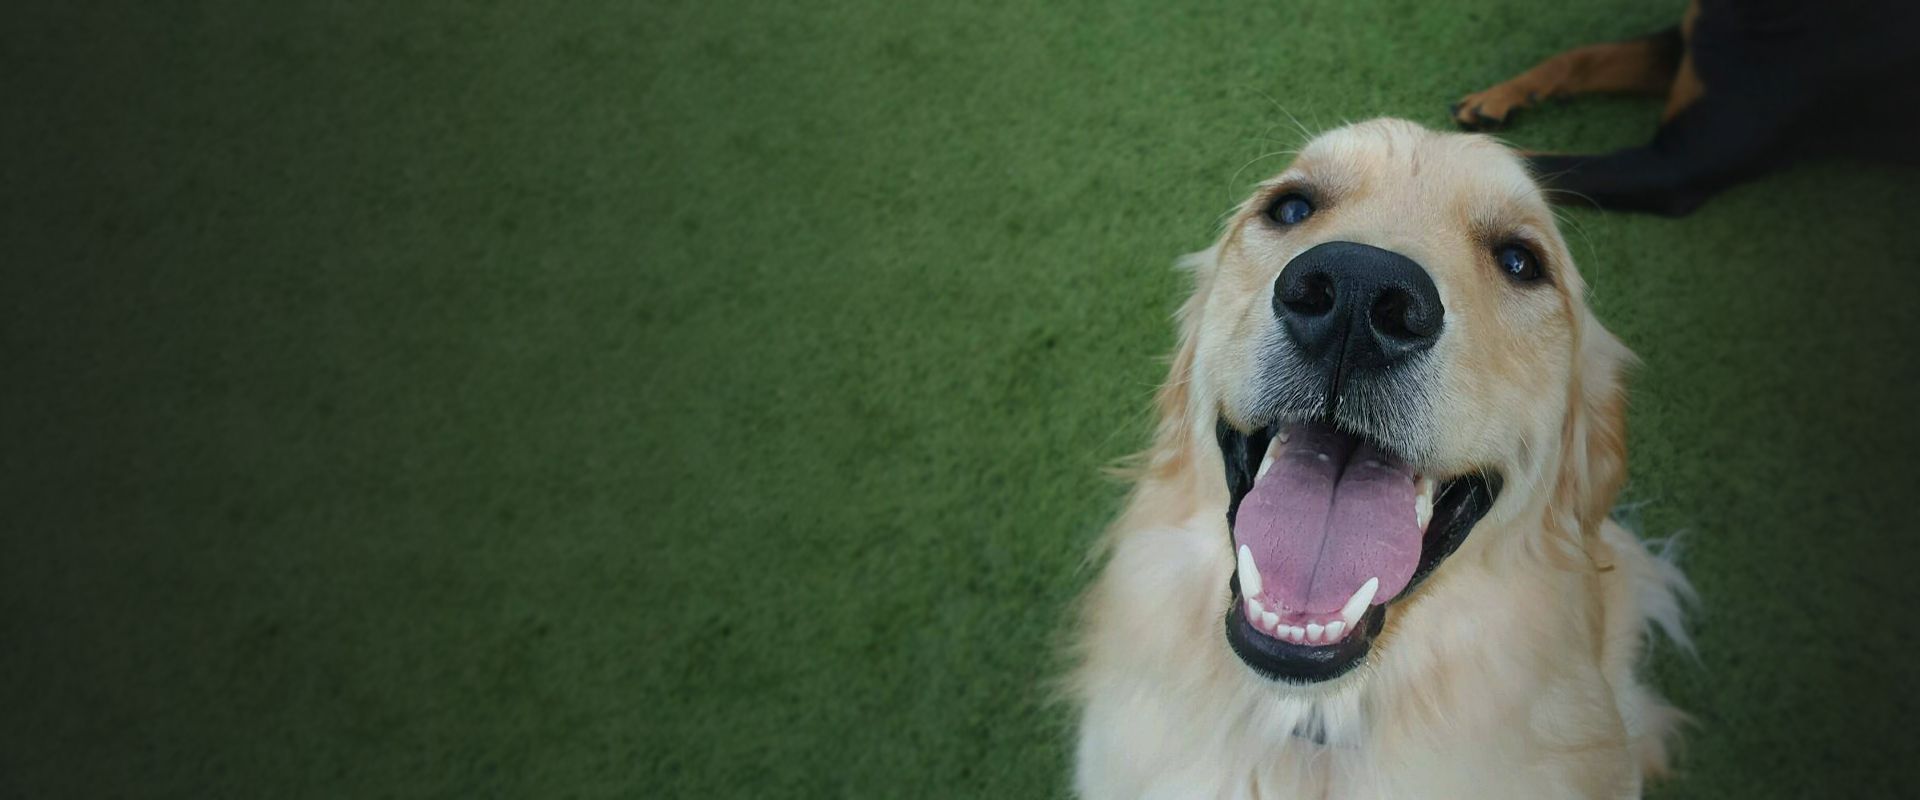 very happy golden retriever dog at camp wagging tails daycare